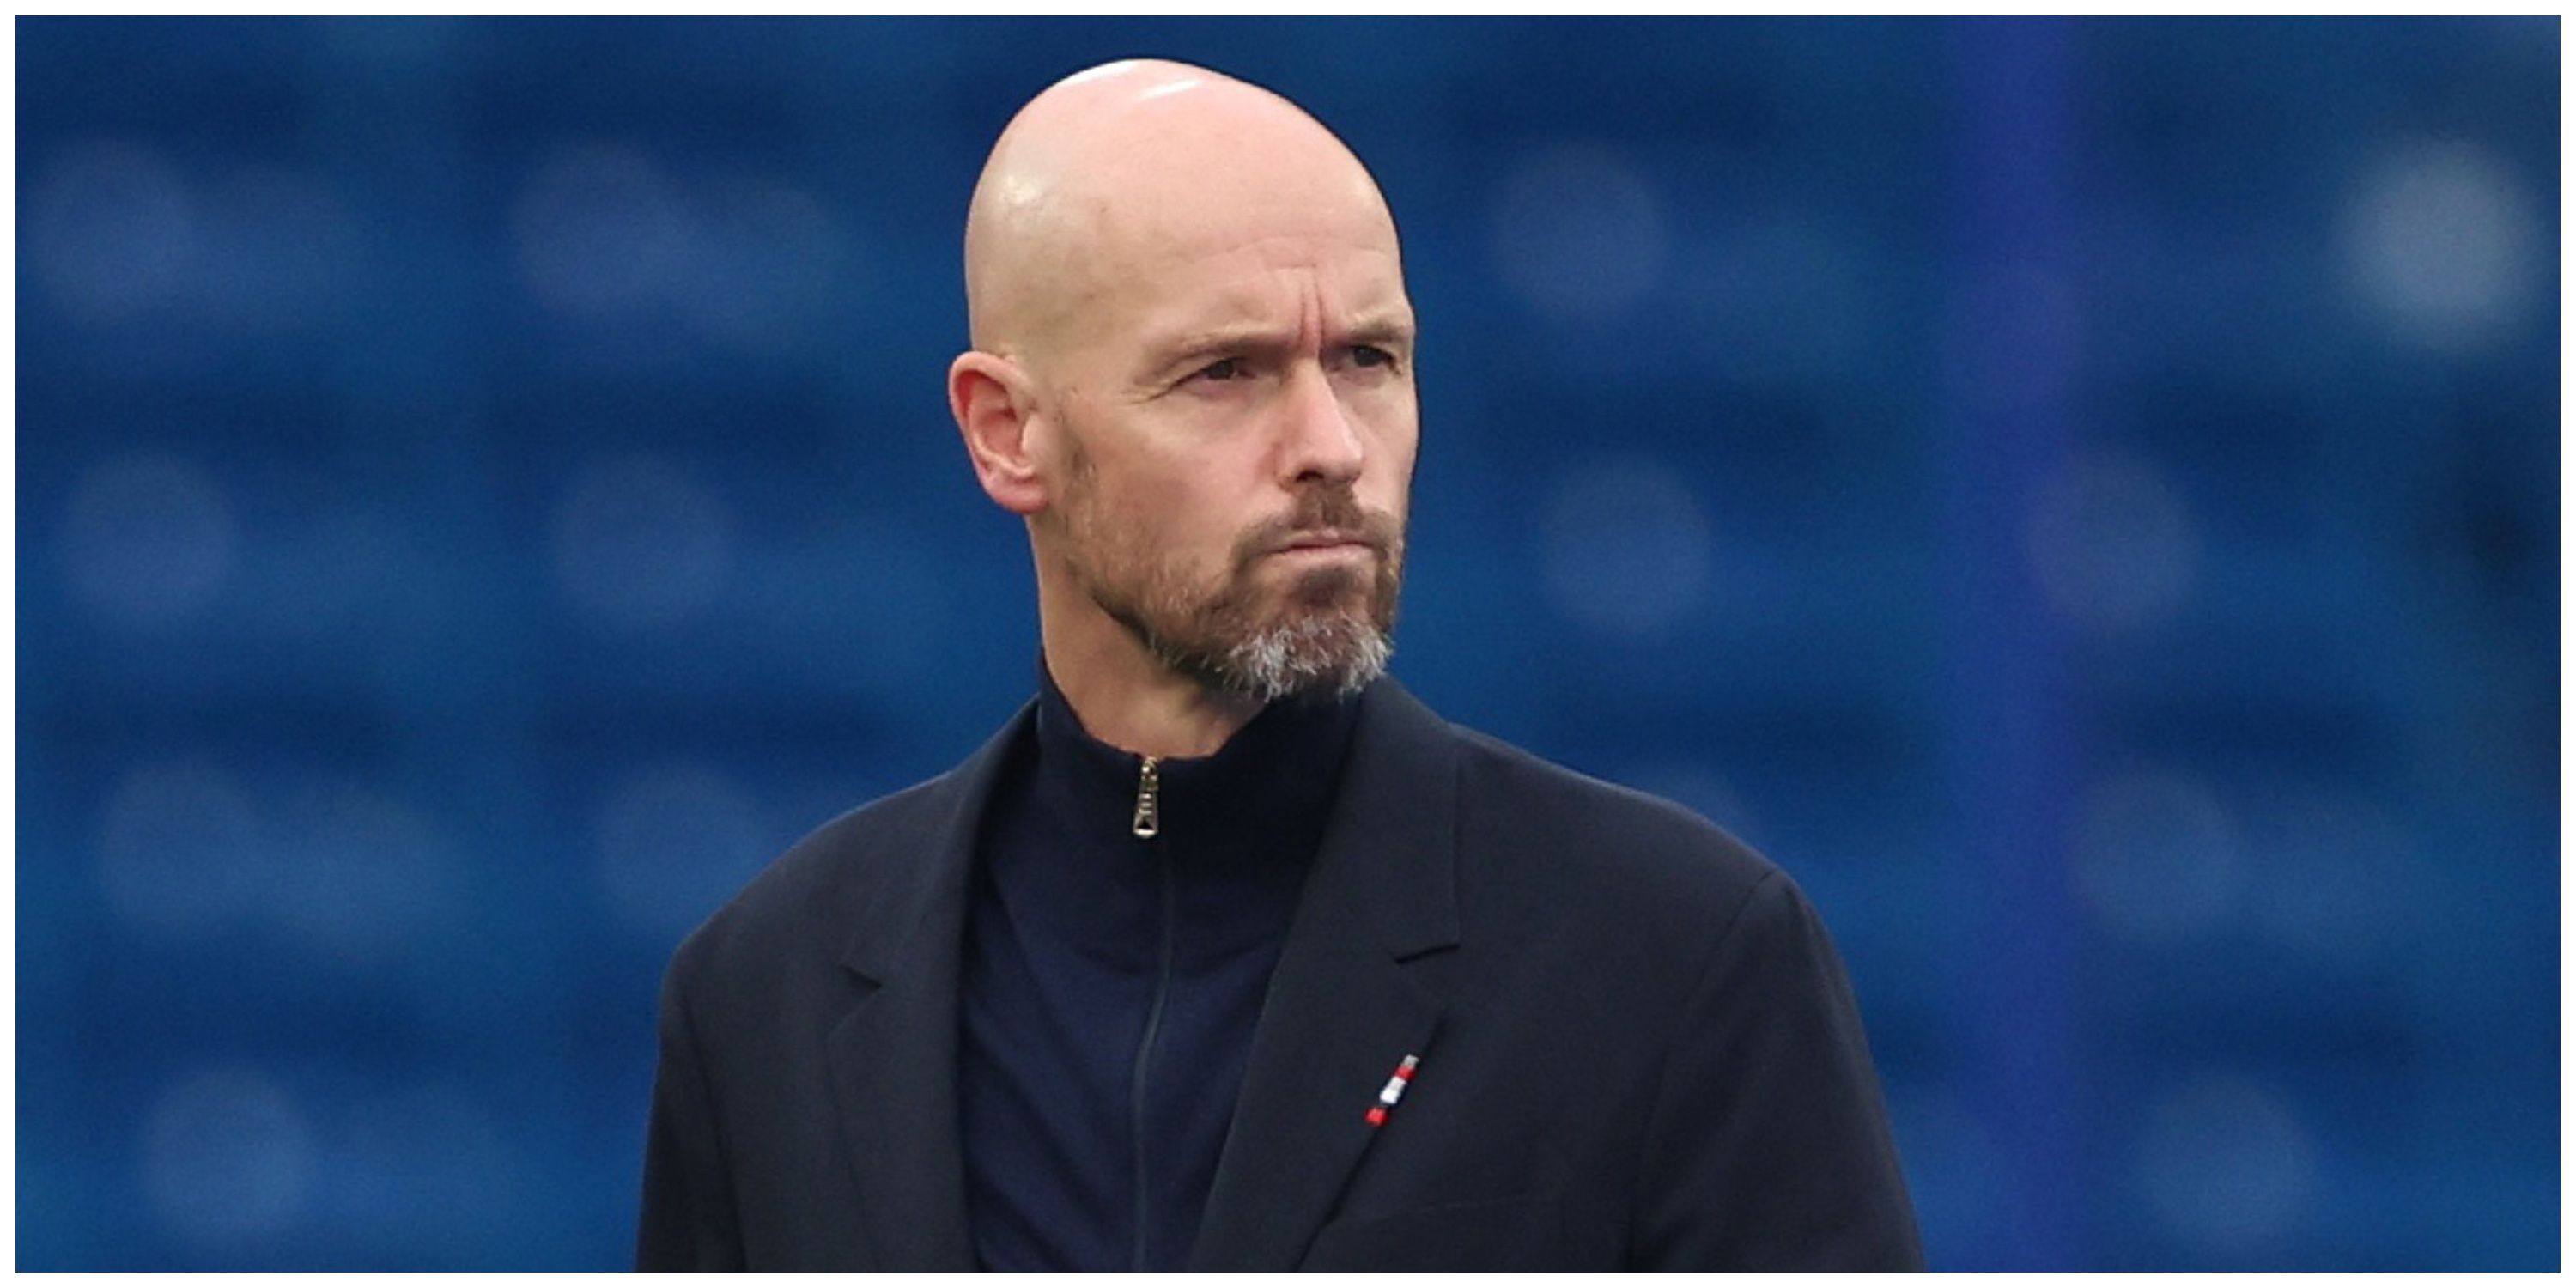 Manchester United manager Erik ten Hag looking serious